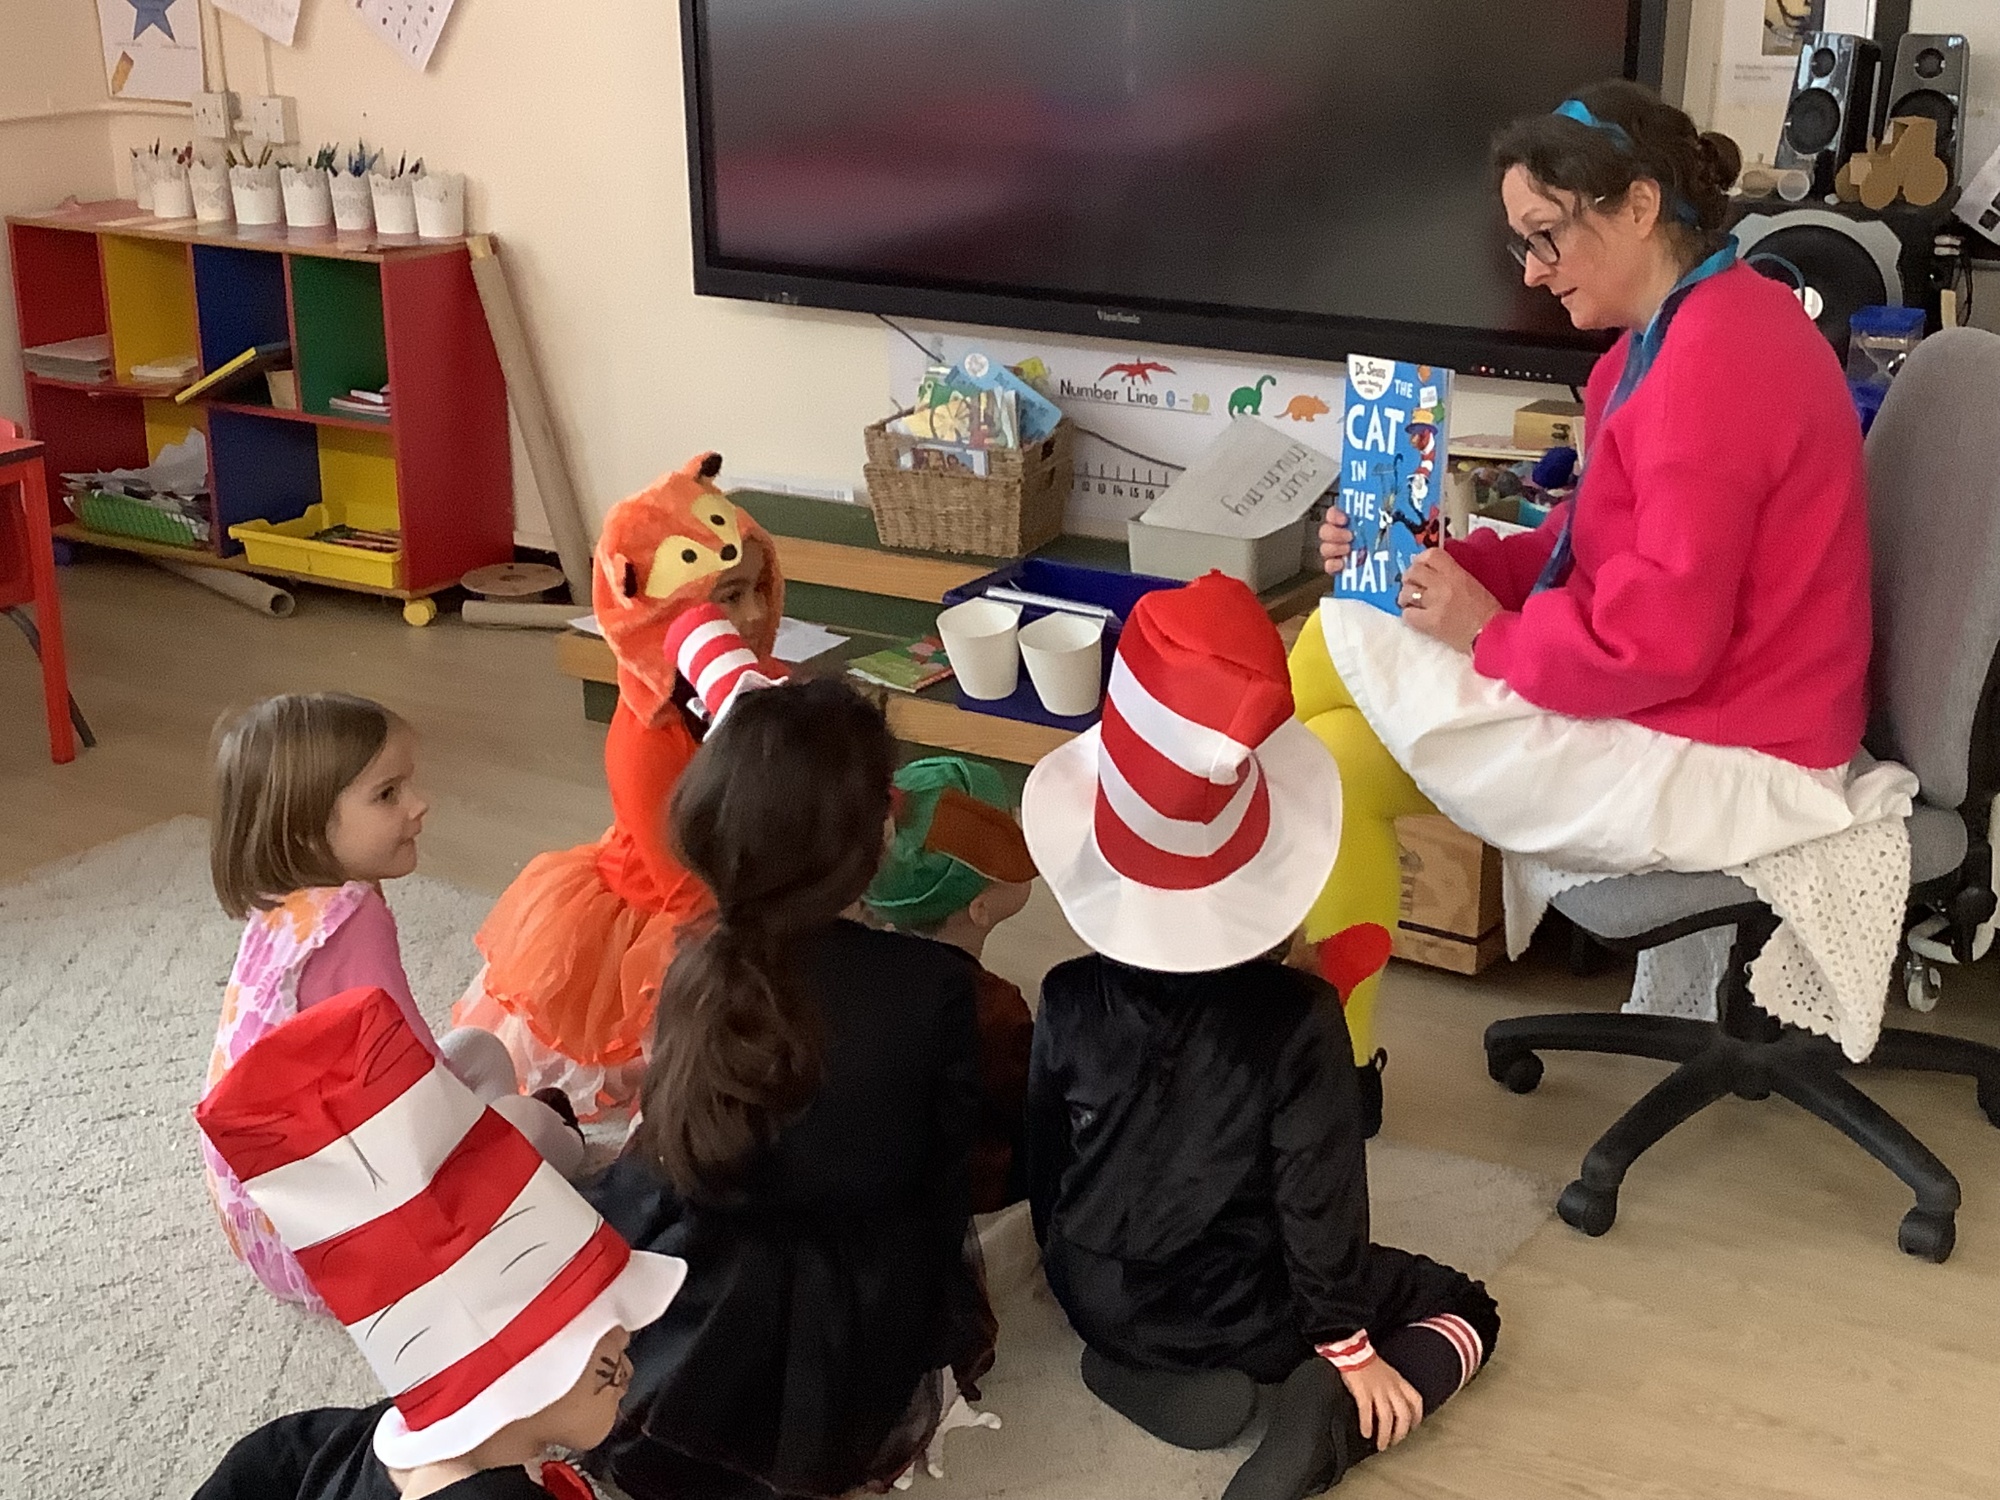 Staff reading to children dressed as characters from Cat in the Hat